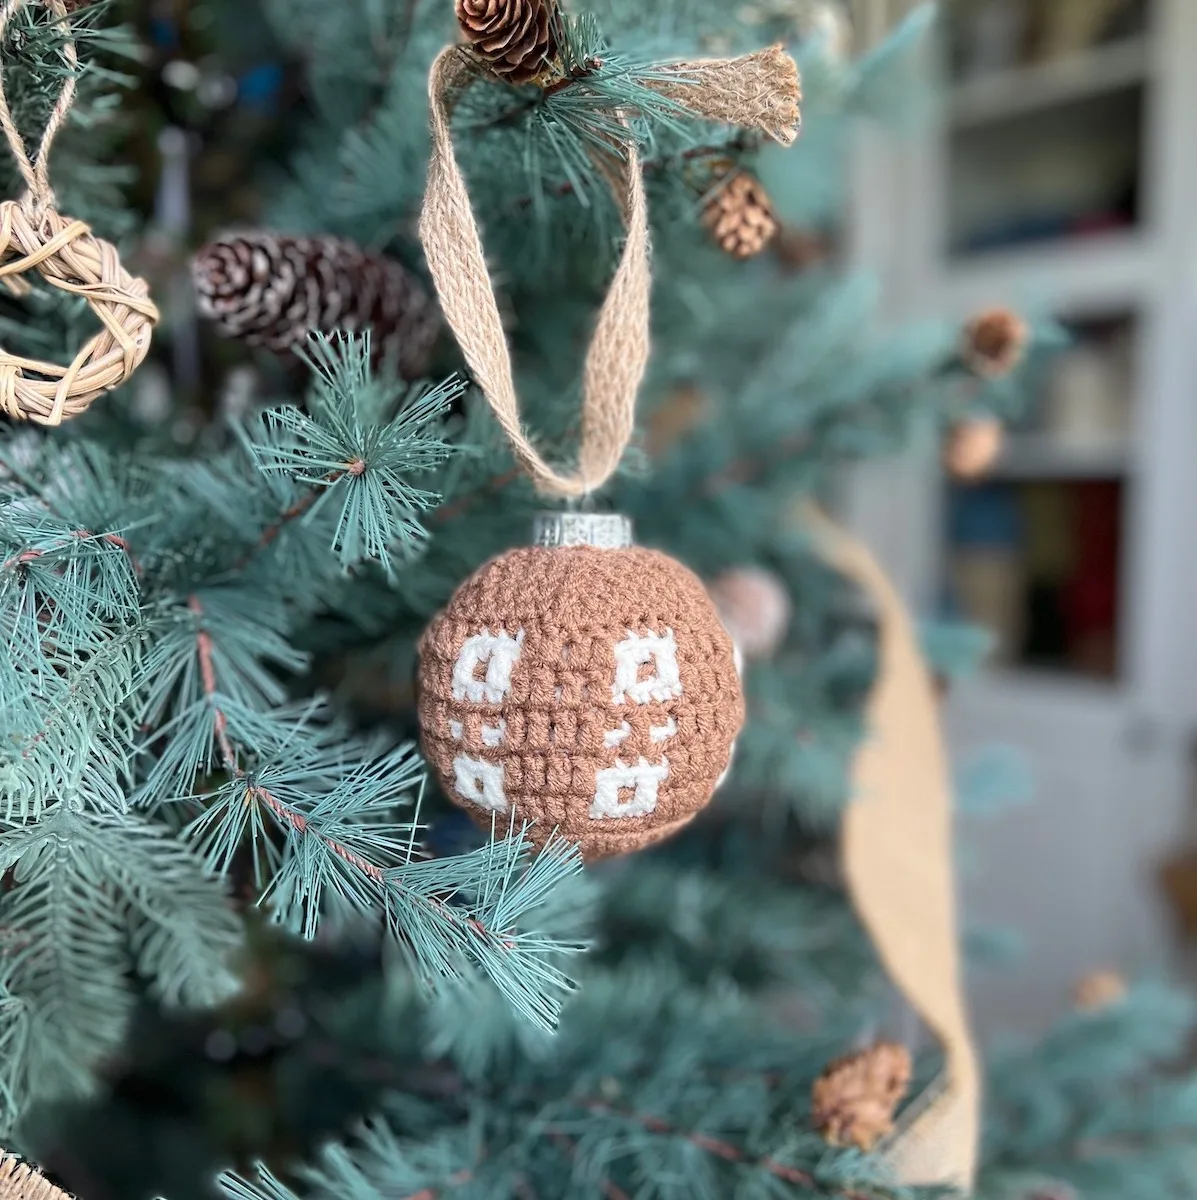 Spots and squares on a crochet bauble hanging on a tree.